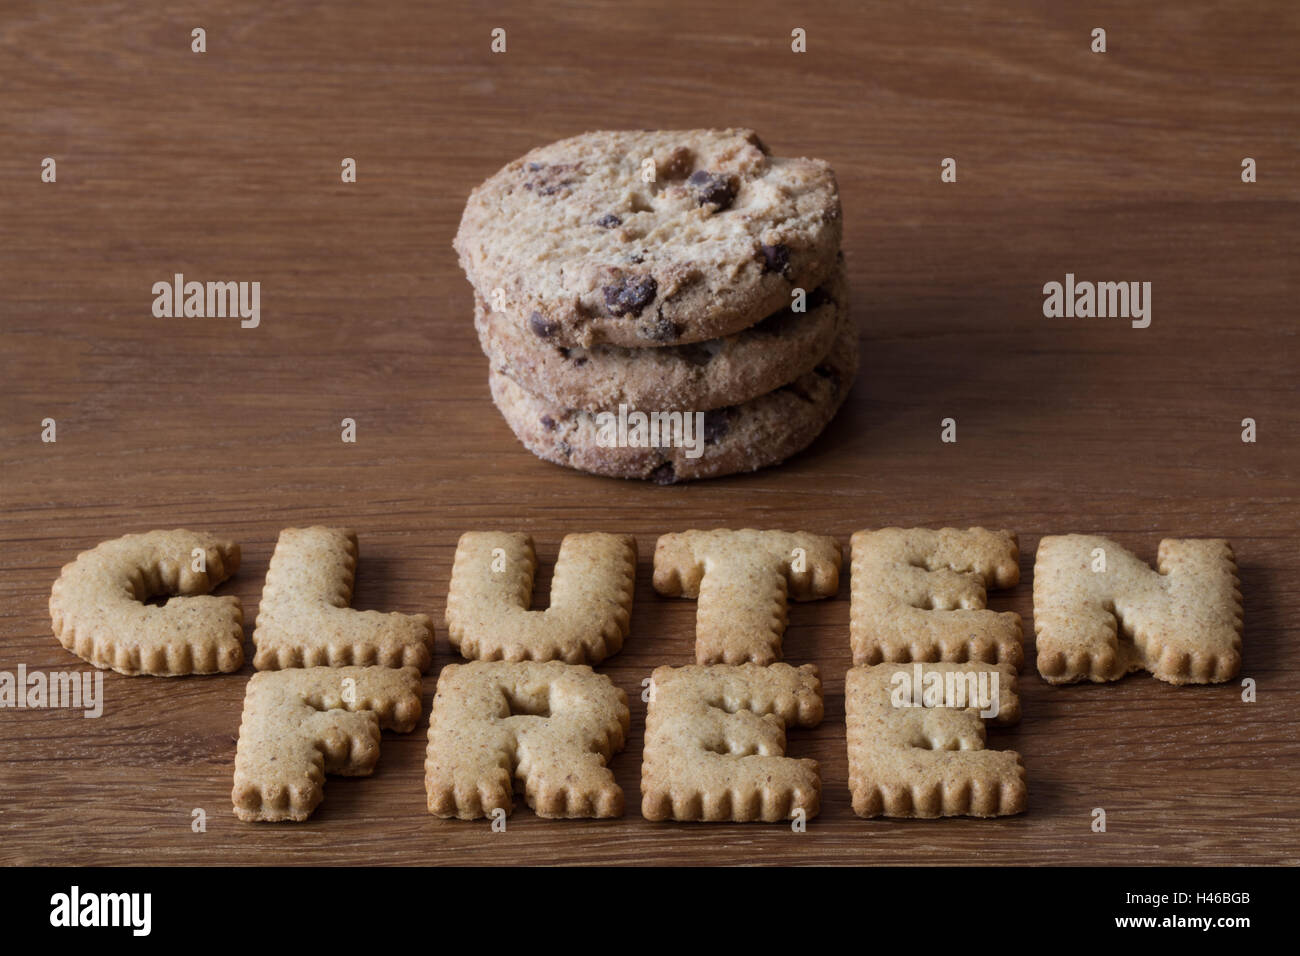 The food advice 'Gluten Free' spelled with alphabet shaped cookies alongside a stack of chocolate chip biscuits on wood. Stock Photo